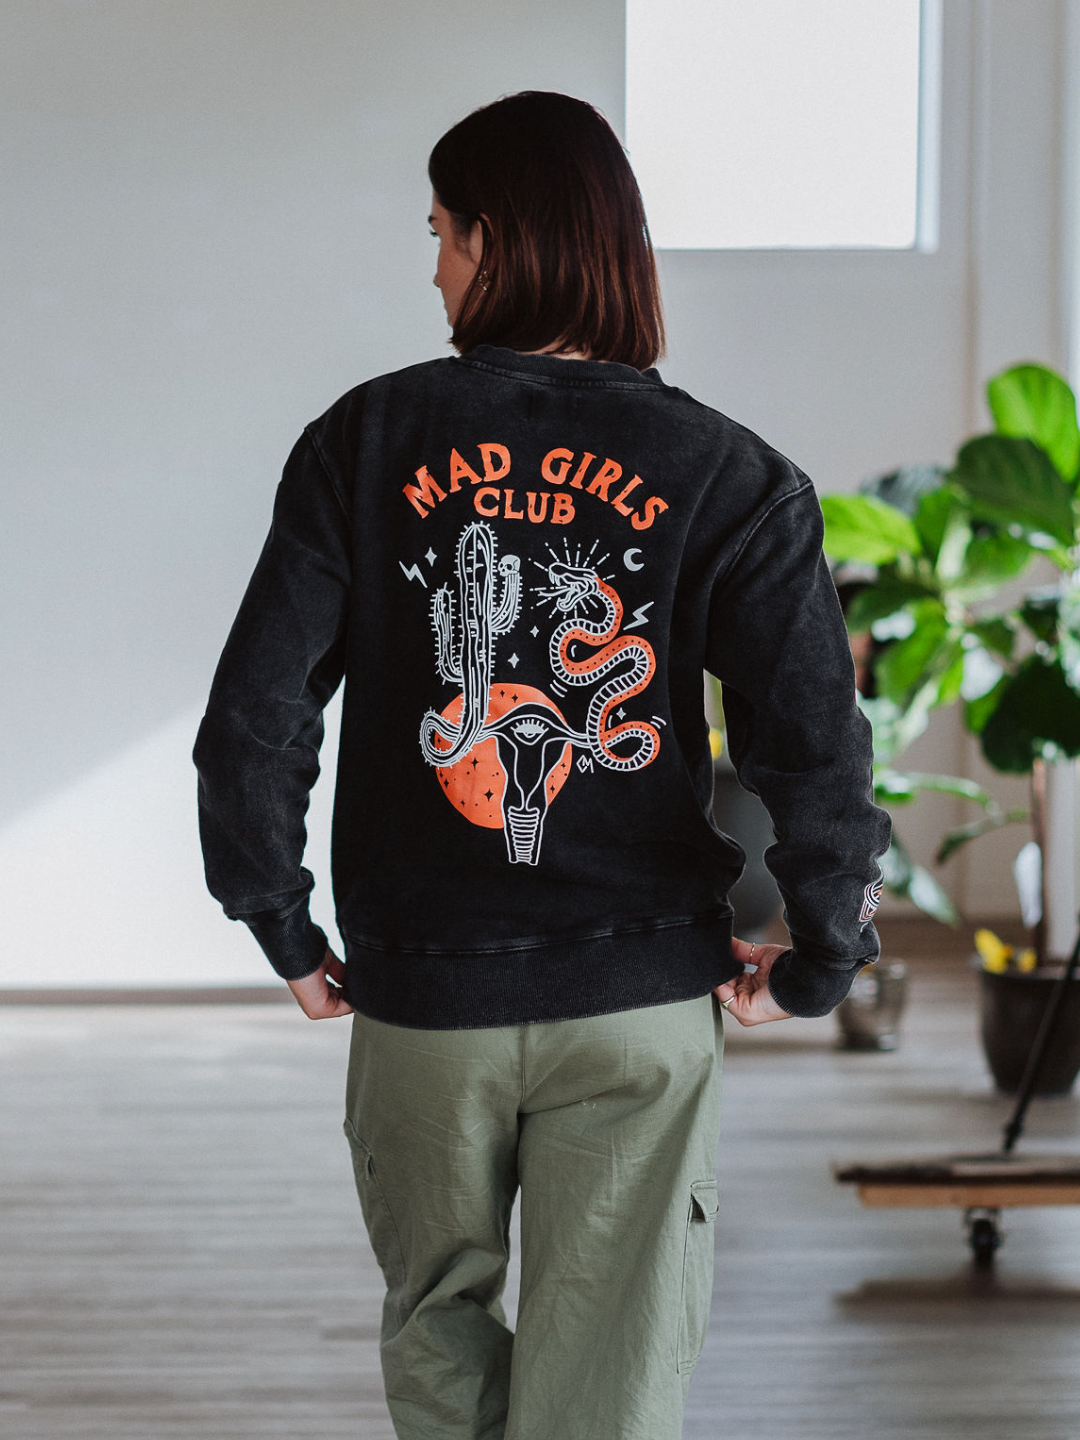 Mad Girls Club Sweater - Octopied Mind